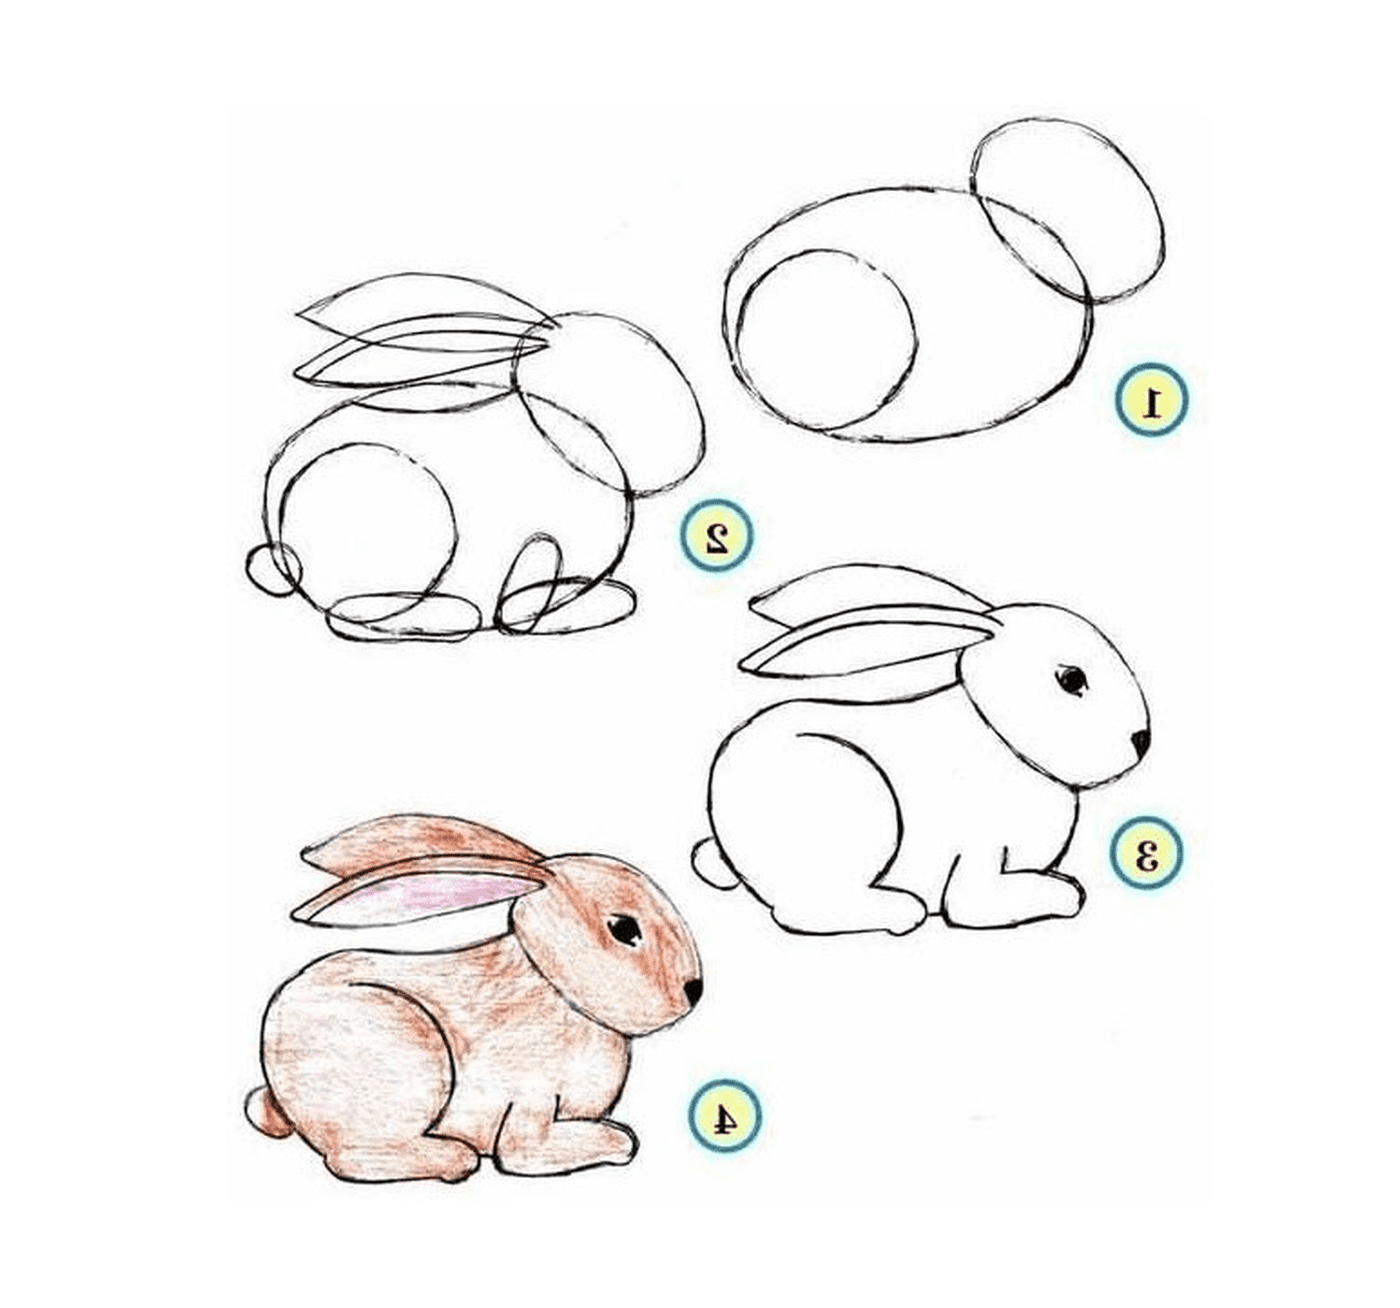  How to draw a rabbit step by step 